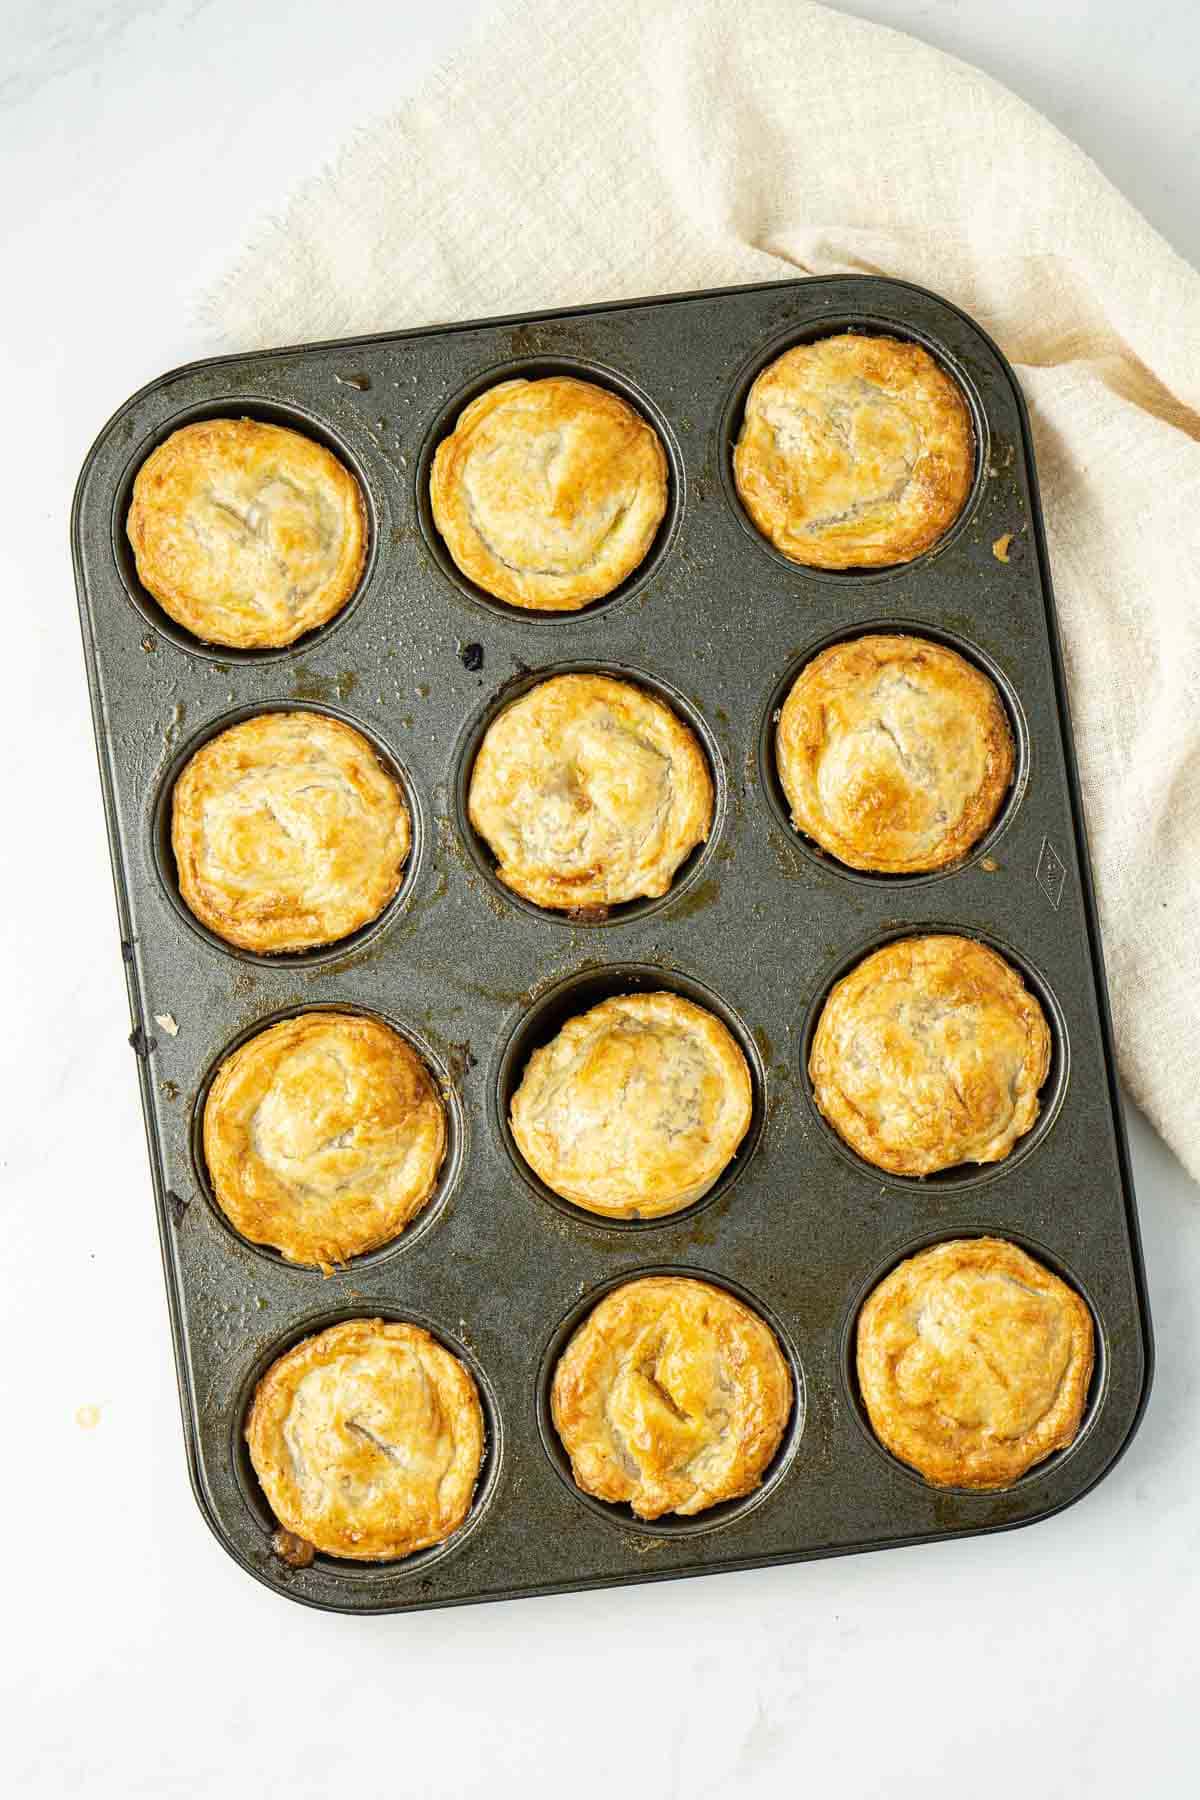 Cooked pies in a muffin pan, fresh from the oven.